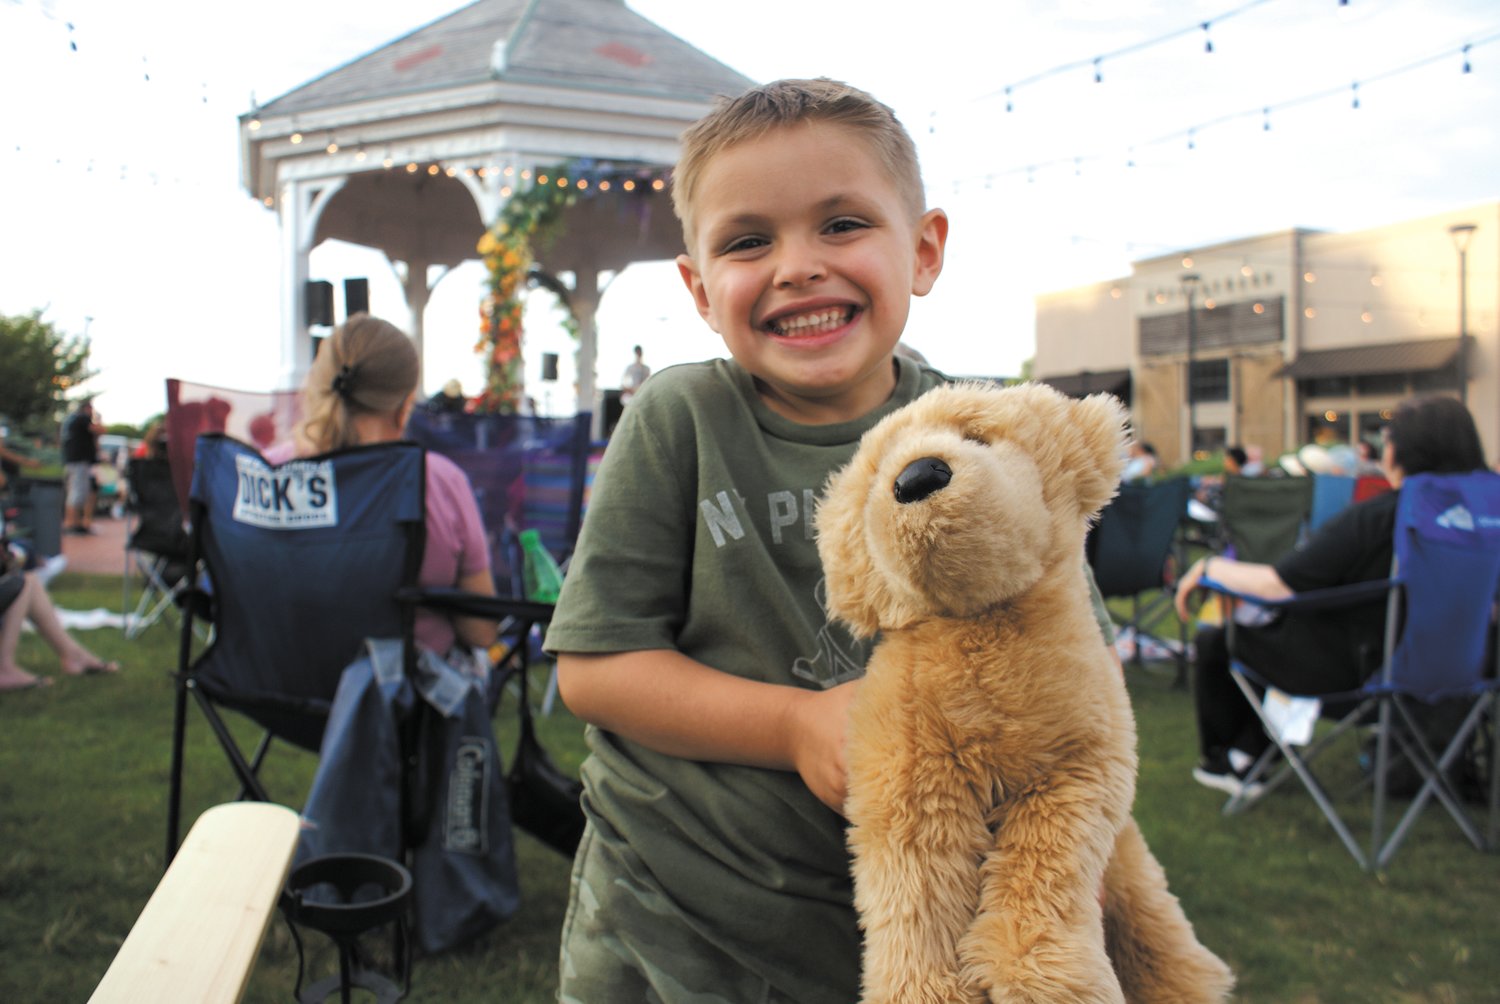 HERE WITH HIS FOUR-LEGGED PAL: Five-year-old Christian Marchetti loved the music. He came to the Garden City concert with his best friend Douglas whom he is holding.